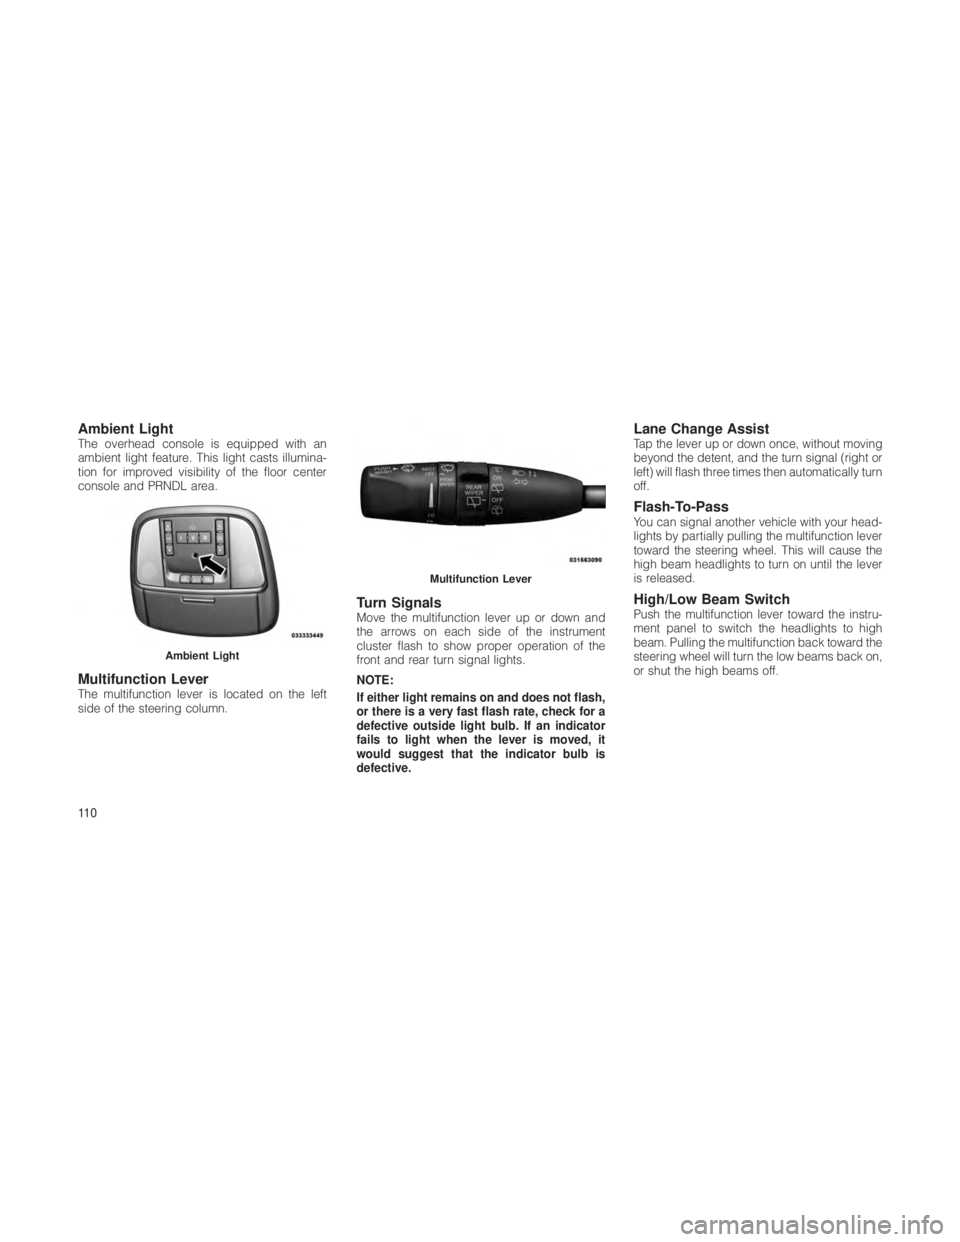 JEEP GRAND CHEROKEE 2012  Owner handbook (in English) Ambient LightThe overhead console is equipped with an
ambient light feature. This light casts illumina-
tion for improved visibility of the floor center
console and PRNDL area.
Multifunction LeverThe 